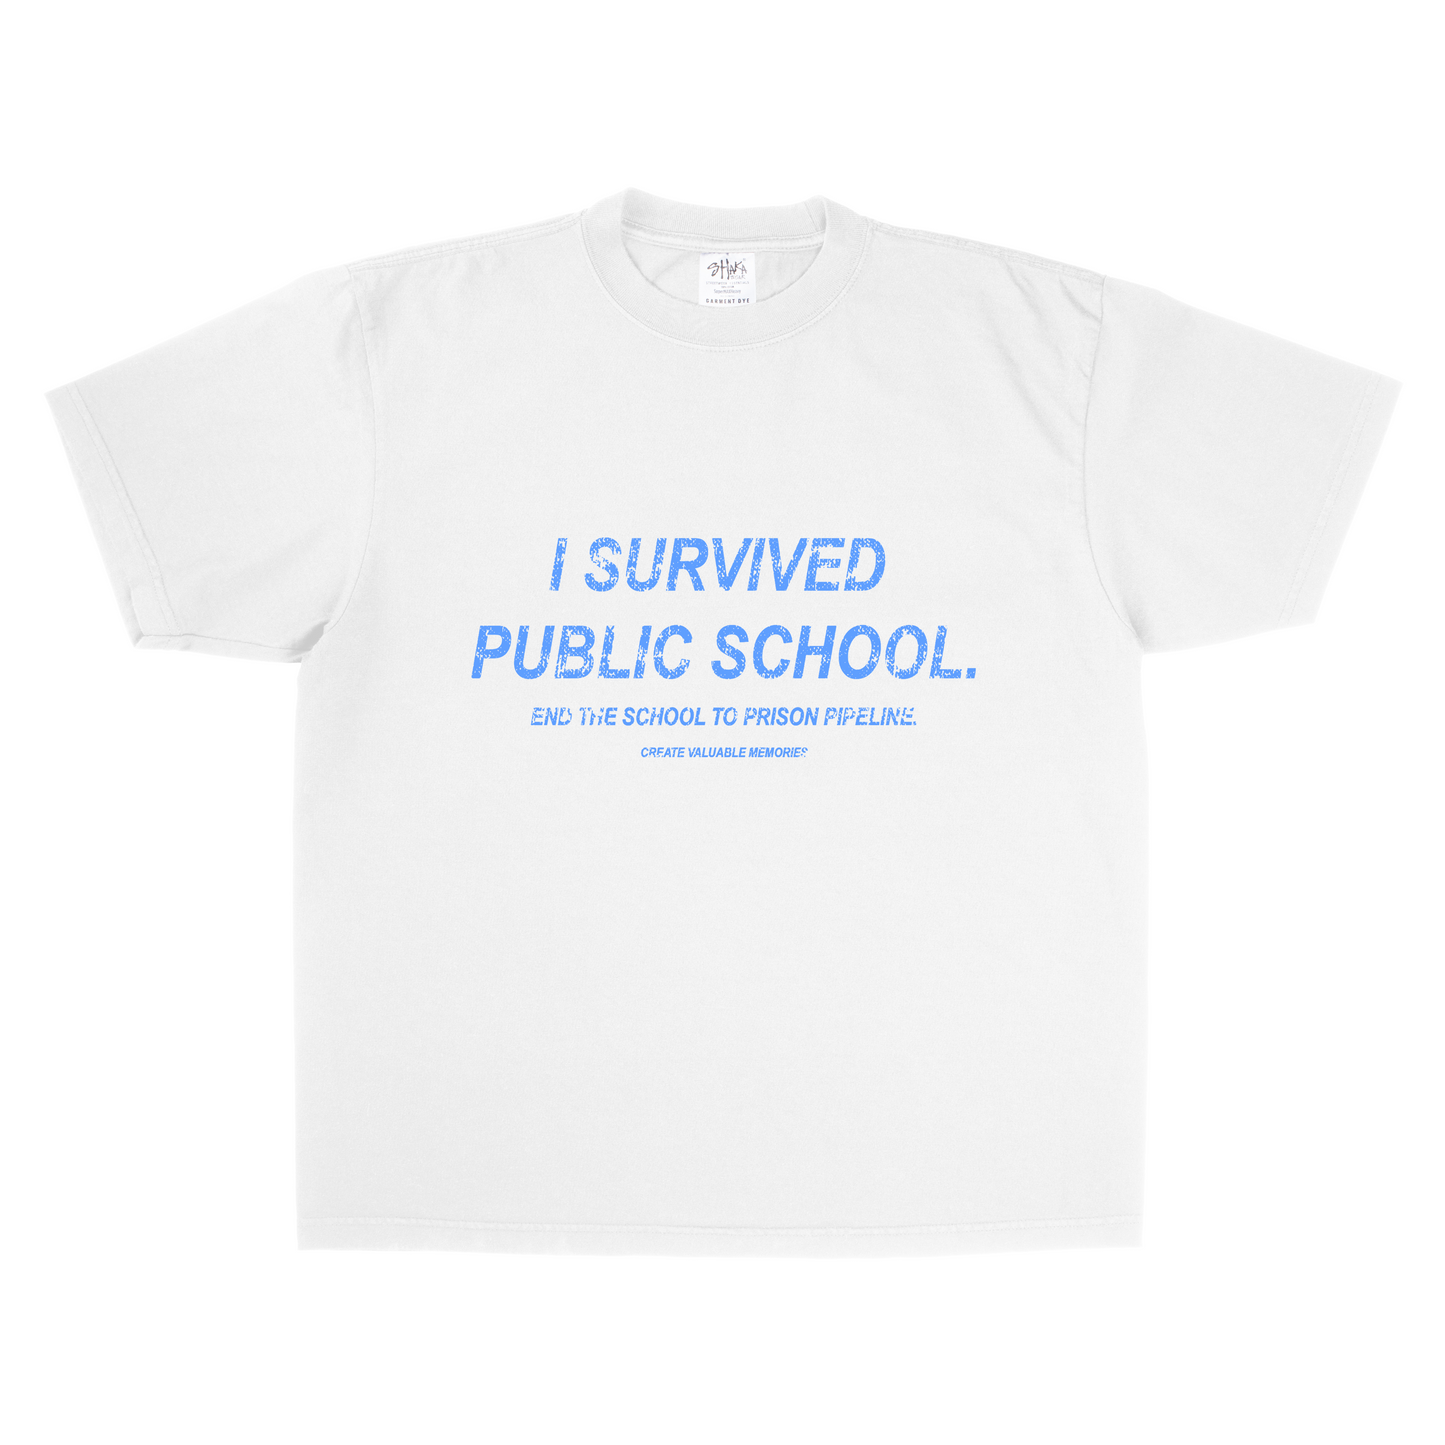 "I survived Public School" (End the School to Prison Pipeline) tee